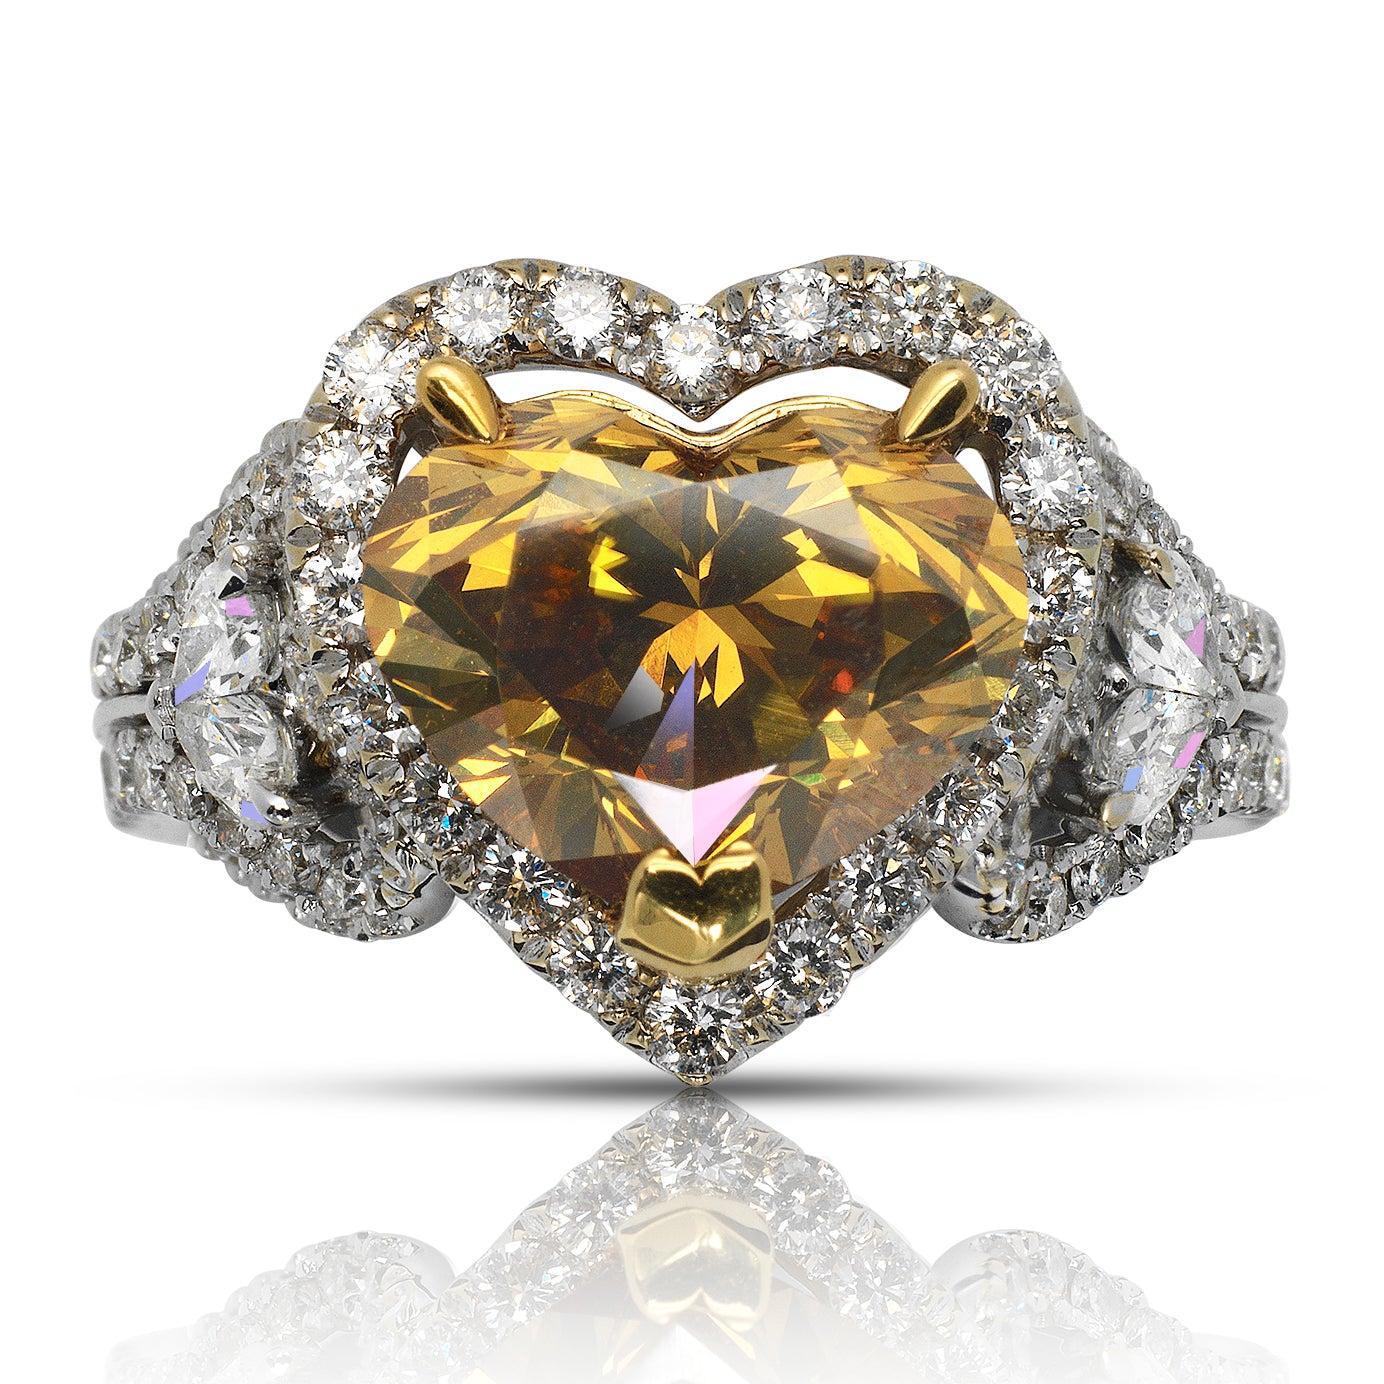 INDY HALO HEART SHAPE FANCY DEEP ORANGY YELLOW DIAMOND ENGAGEMENT RING BY MIKE NEKTA


Center Diamond:

Grading Report: EGL USA 
Carat Weight : 3.19 Carats
Color Grade:   Fancy Deep Orange Yellow  
Clarity: VS1 

Distribution : EVEN
Comments: